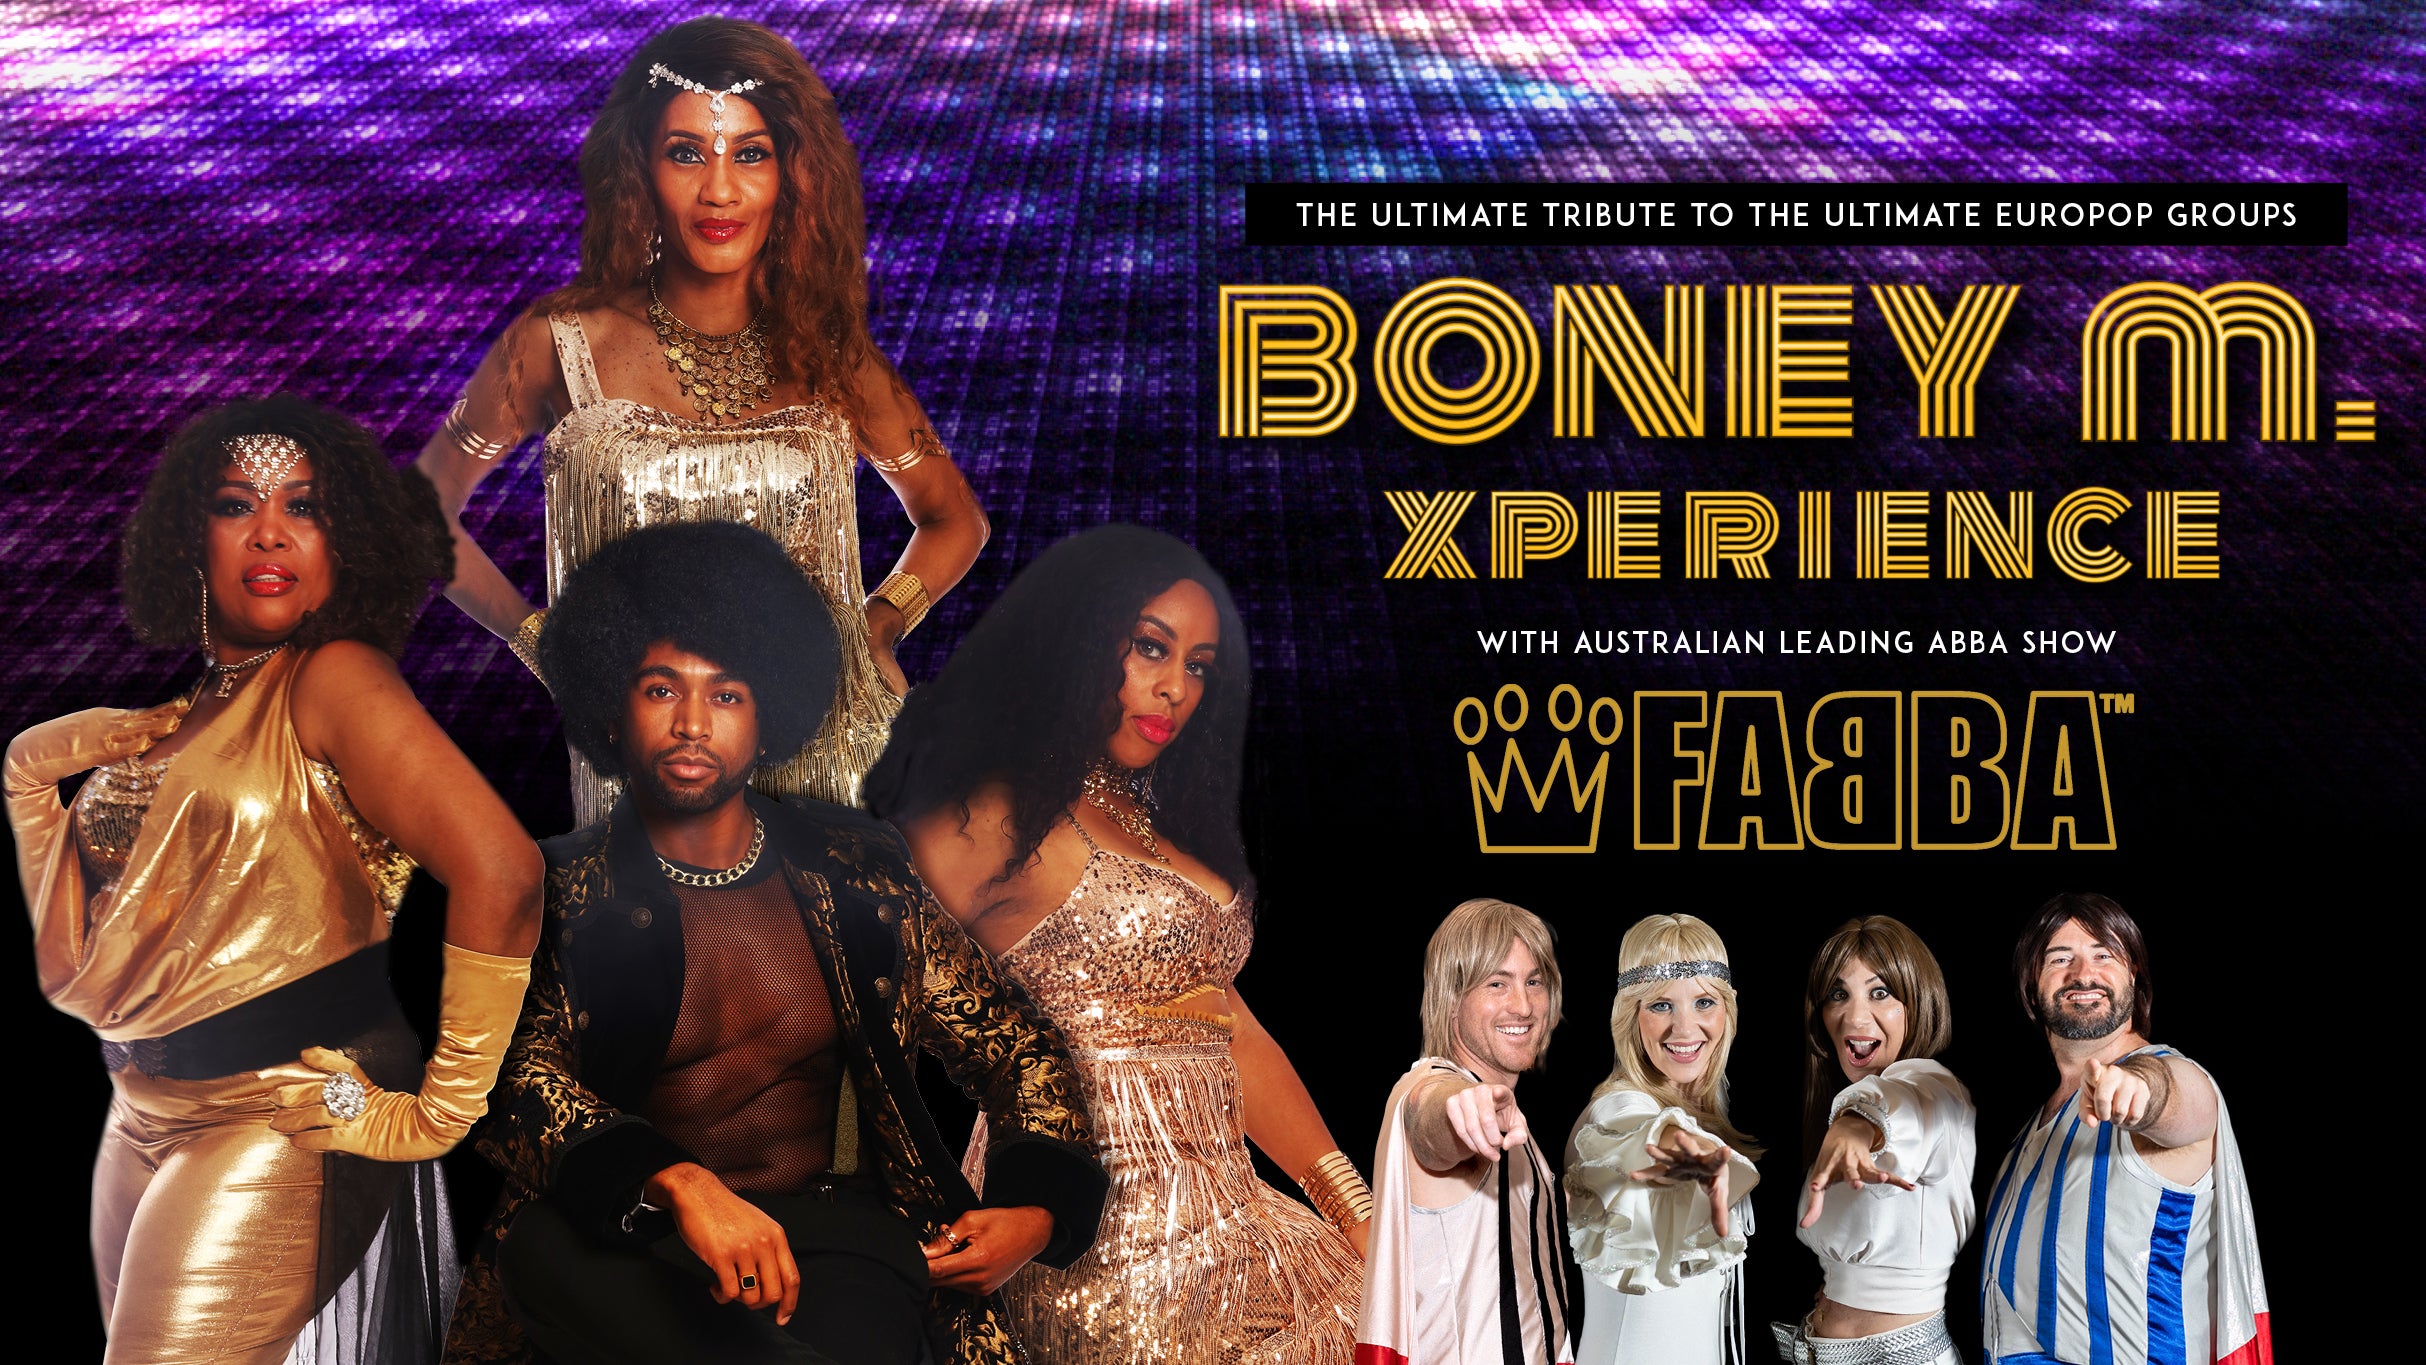 Image used with permission from Ticketmaster | Boney M.Xperience and Fabba tickets